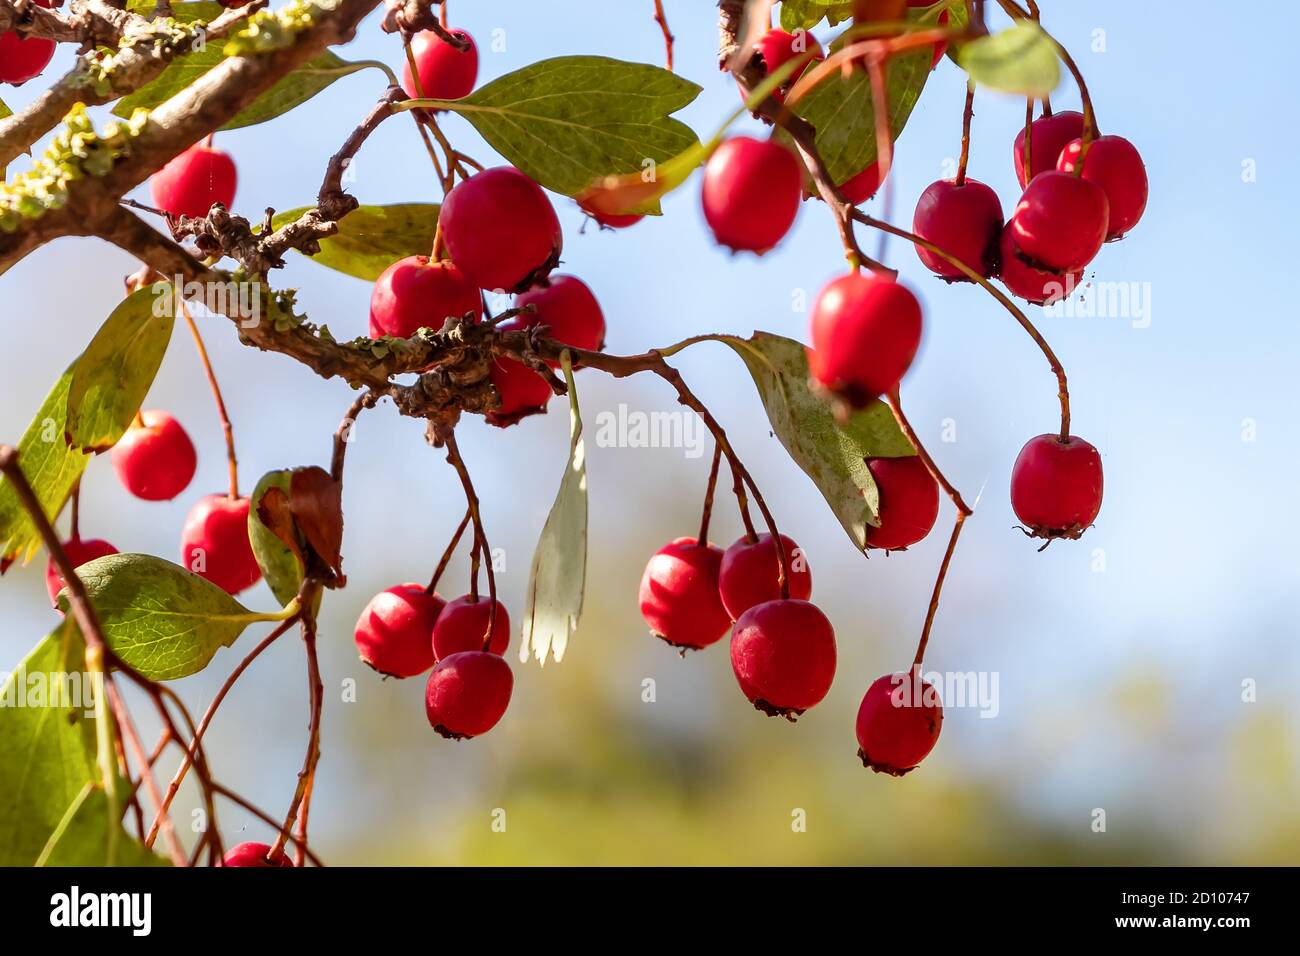 Crataegus, commonly called hawthorn, is a large genus of shrubs in the family Rosaceae. They are found in Europe, Asia and North America. Shallow dept Stock Photo